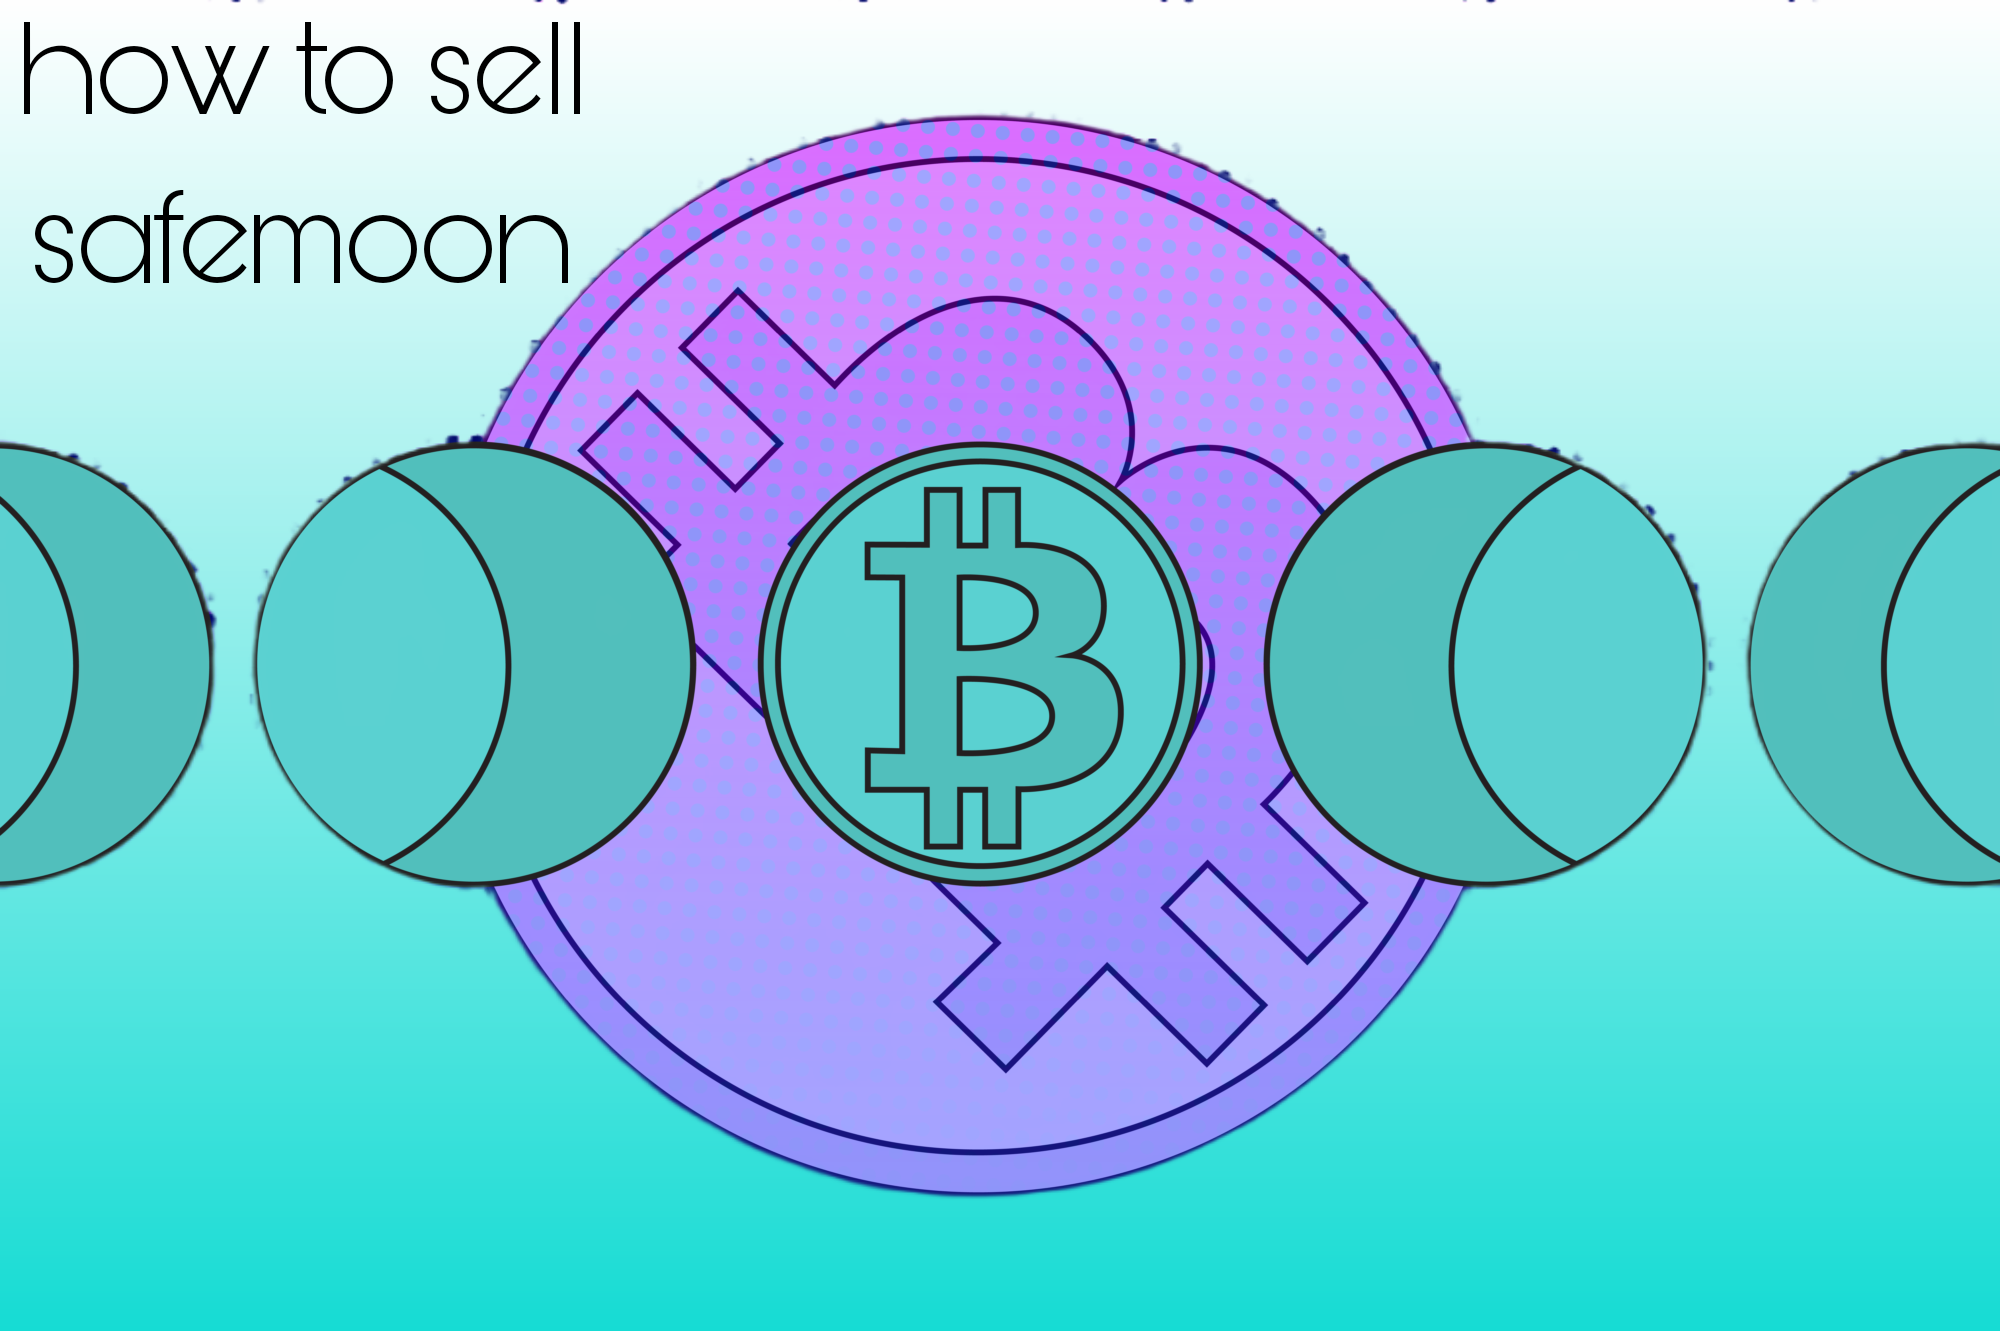 How To Promote Safemoon In 2022 On Belief Pockets?